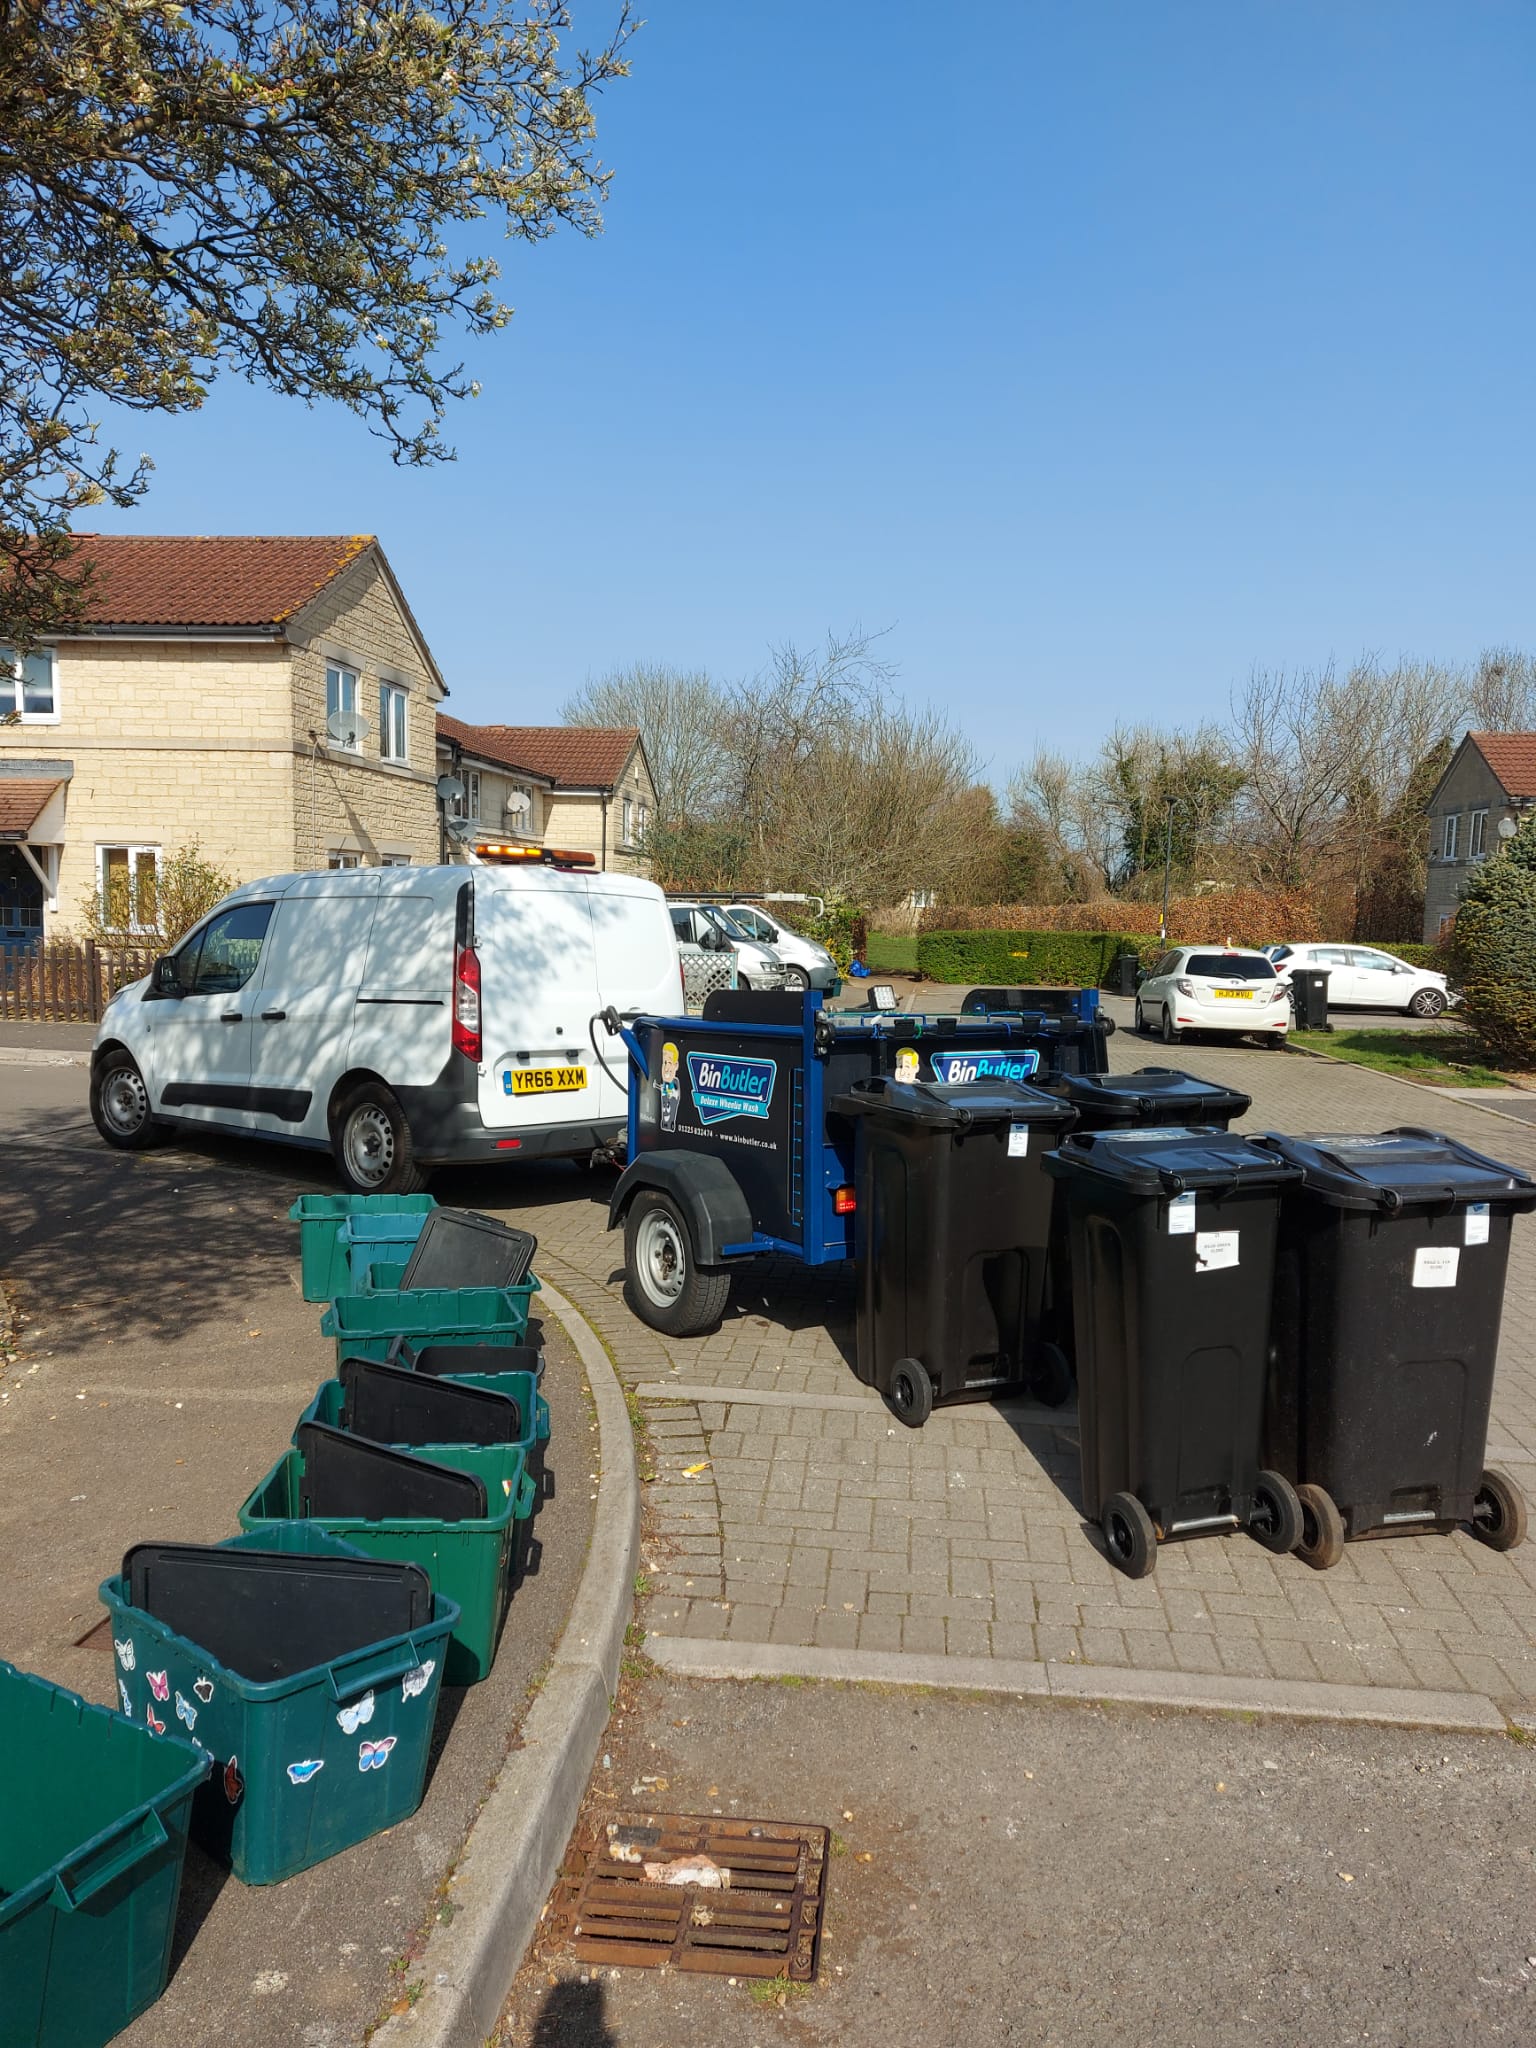 Why Plastic is the perfect material for a wheelie bin